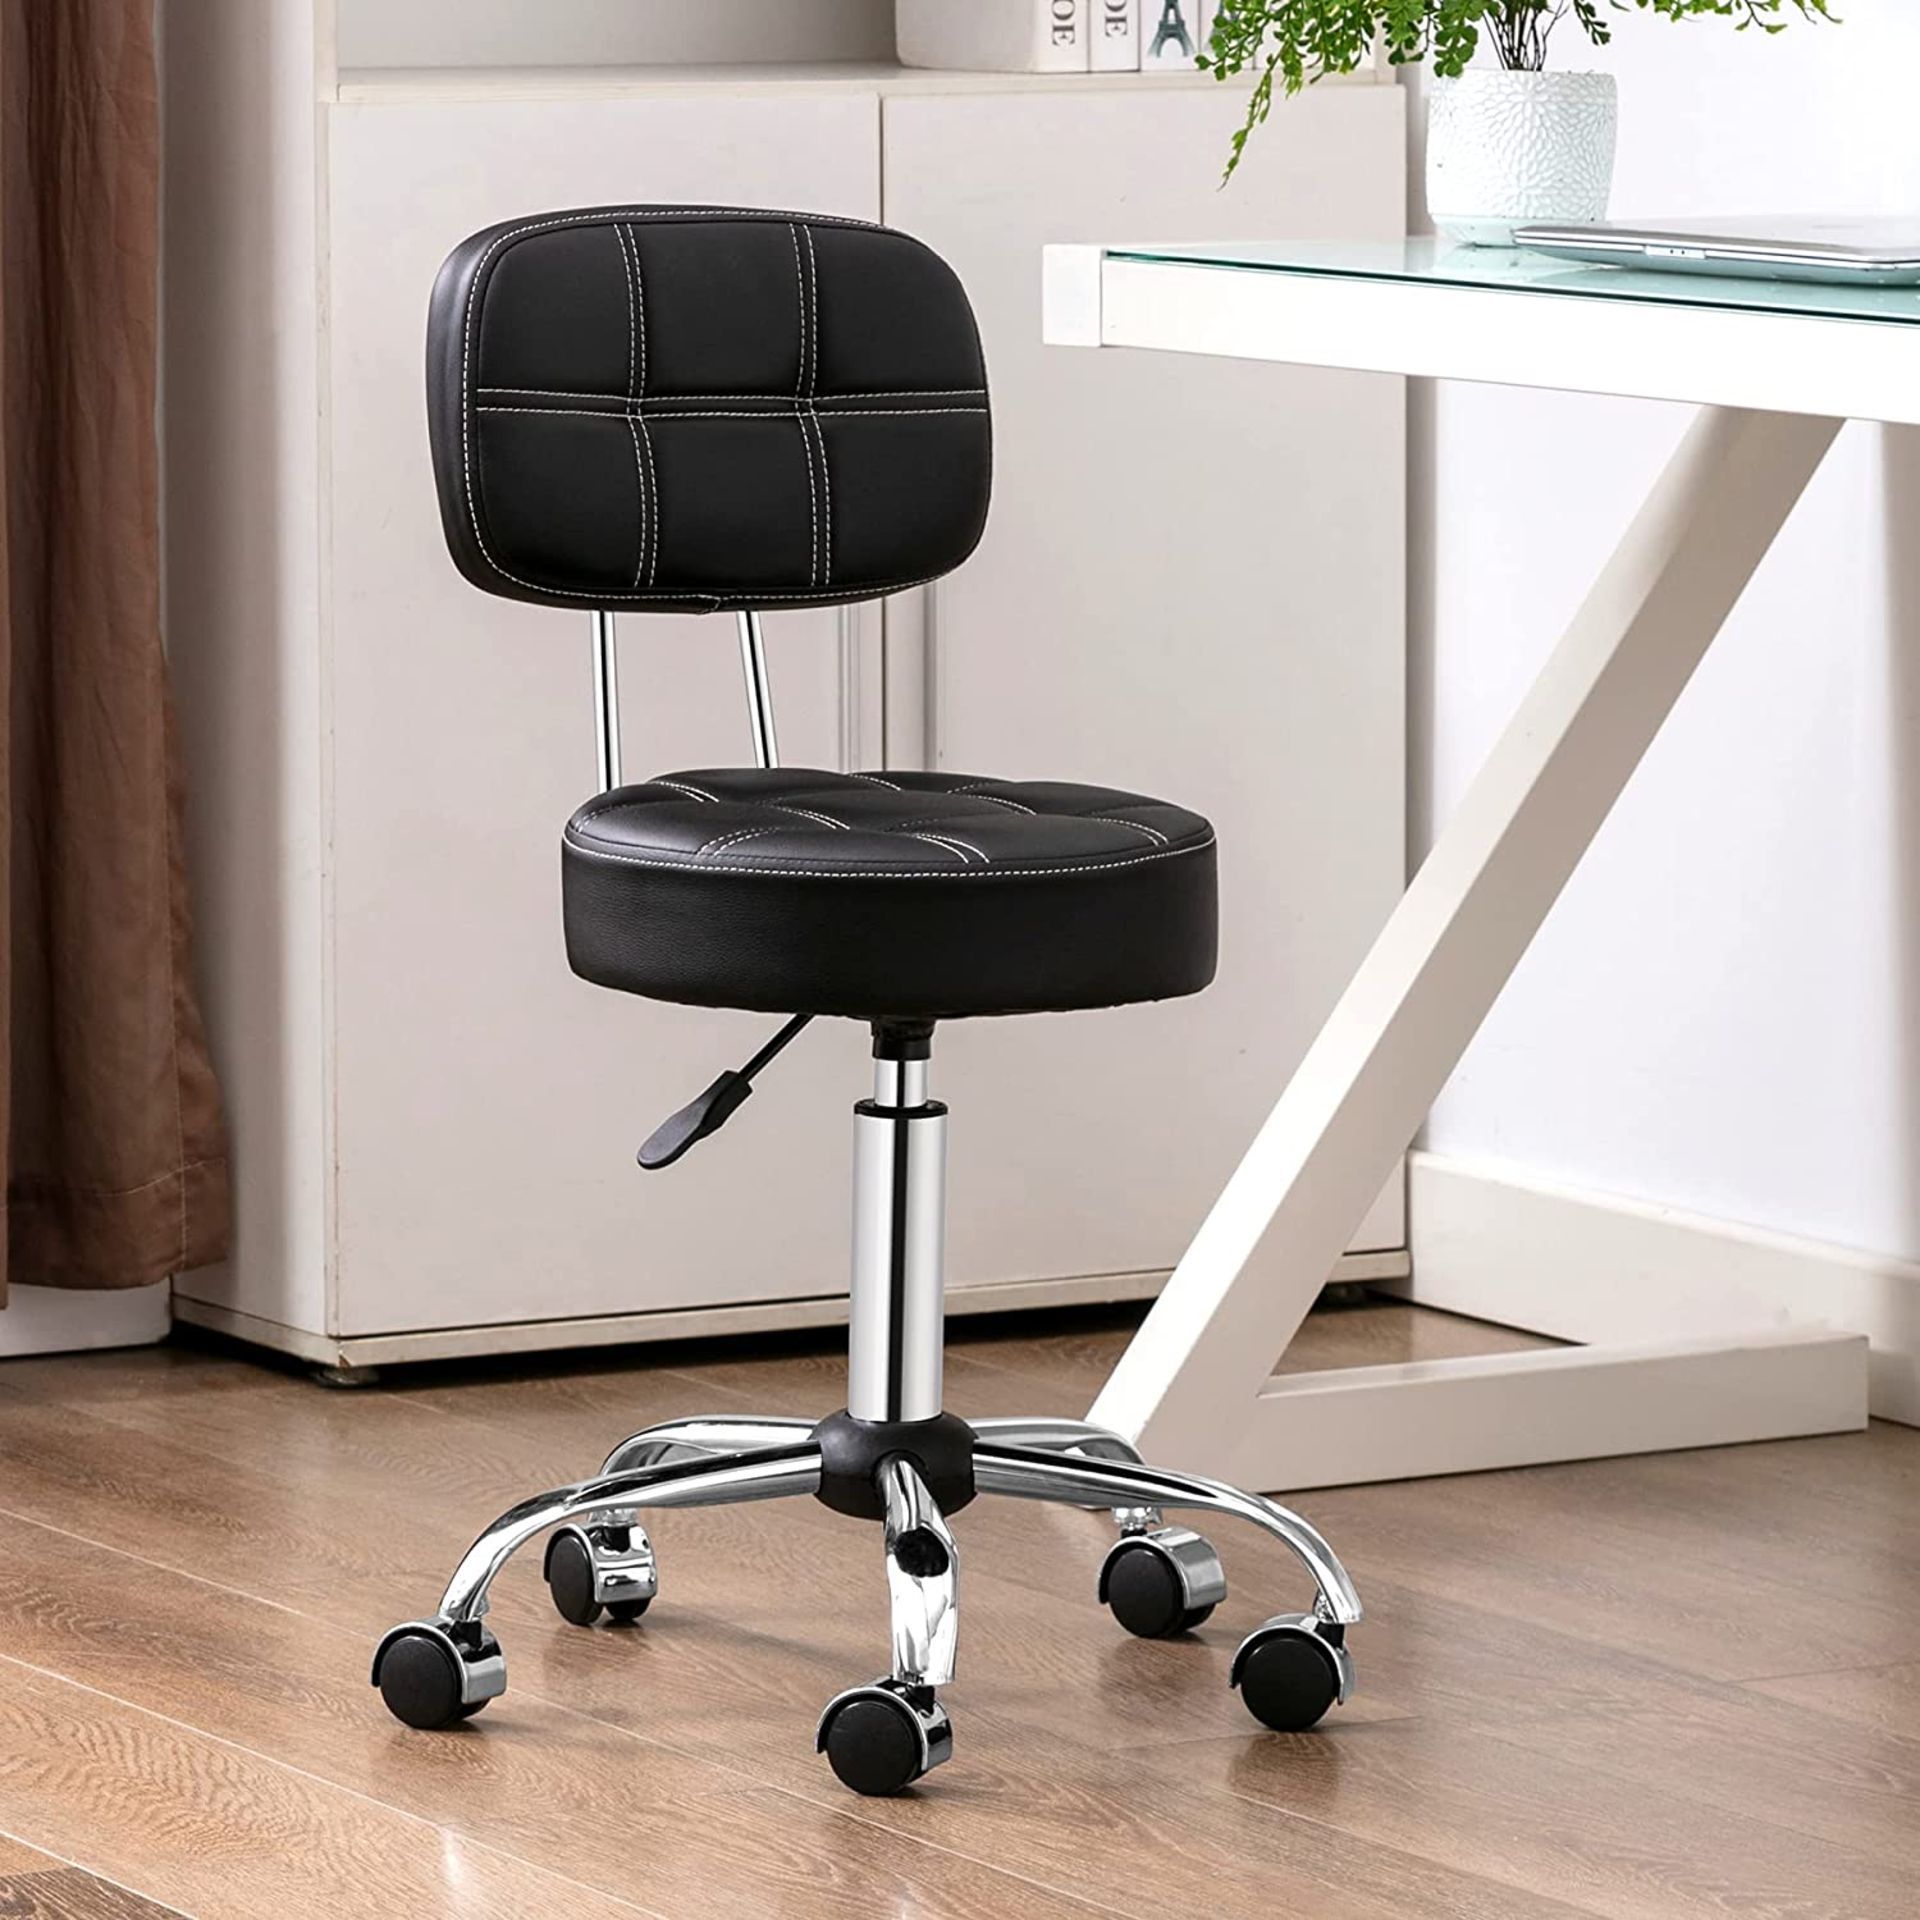 PALLET TO CONTAIN 6x NEW Rolling stool with High Backrest, Leather Massage Stool Ergonomic - Image 3 of 5